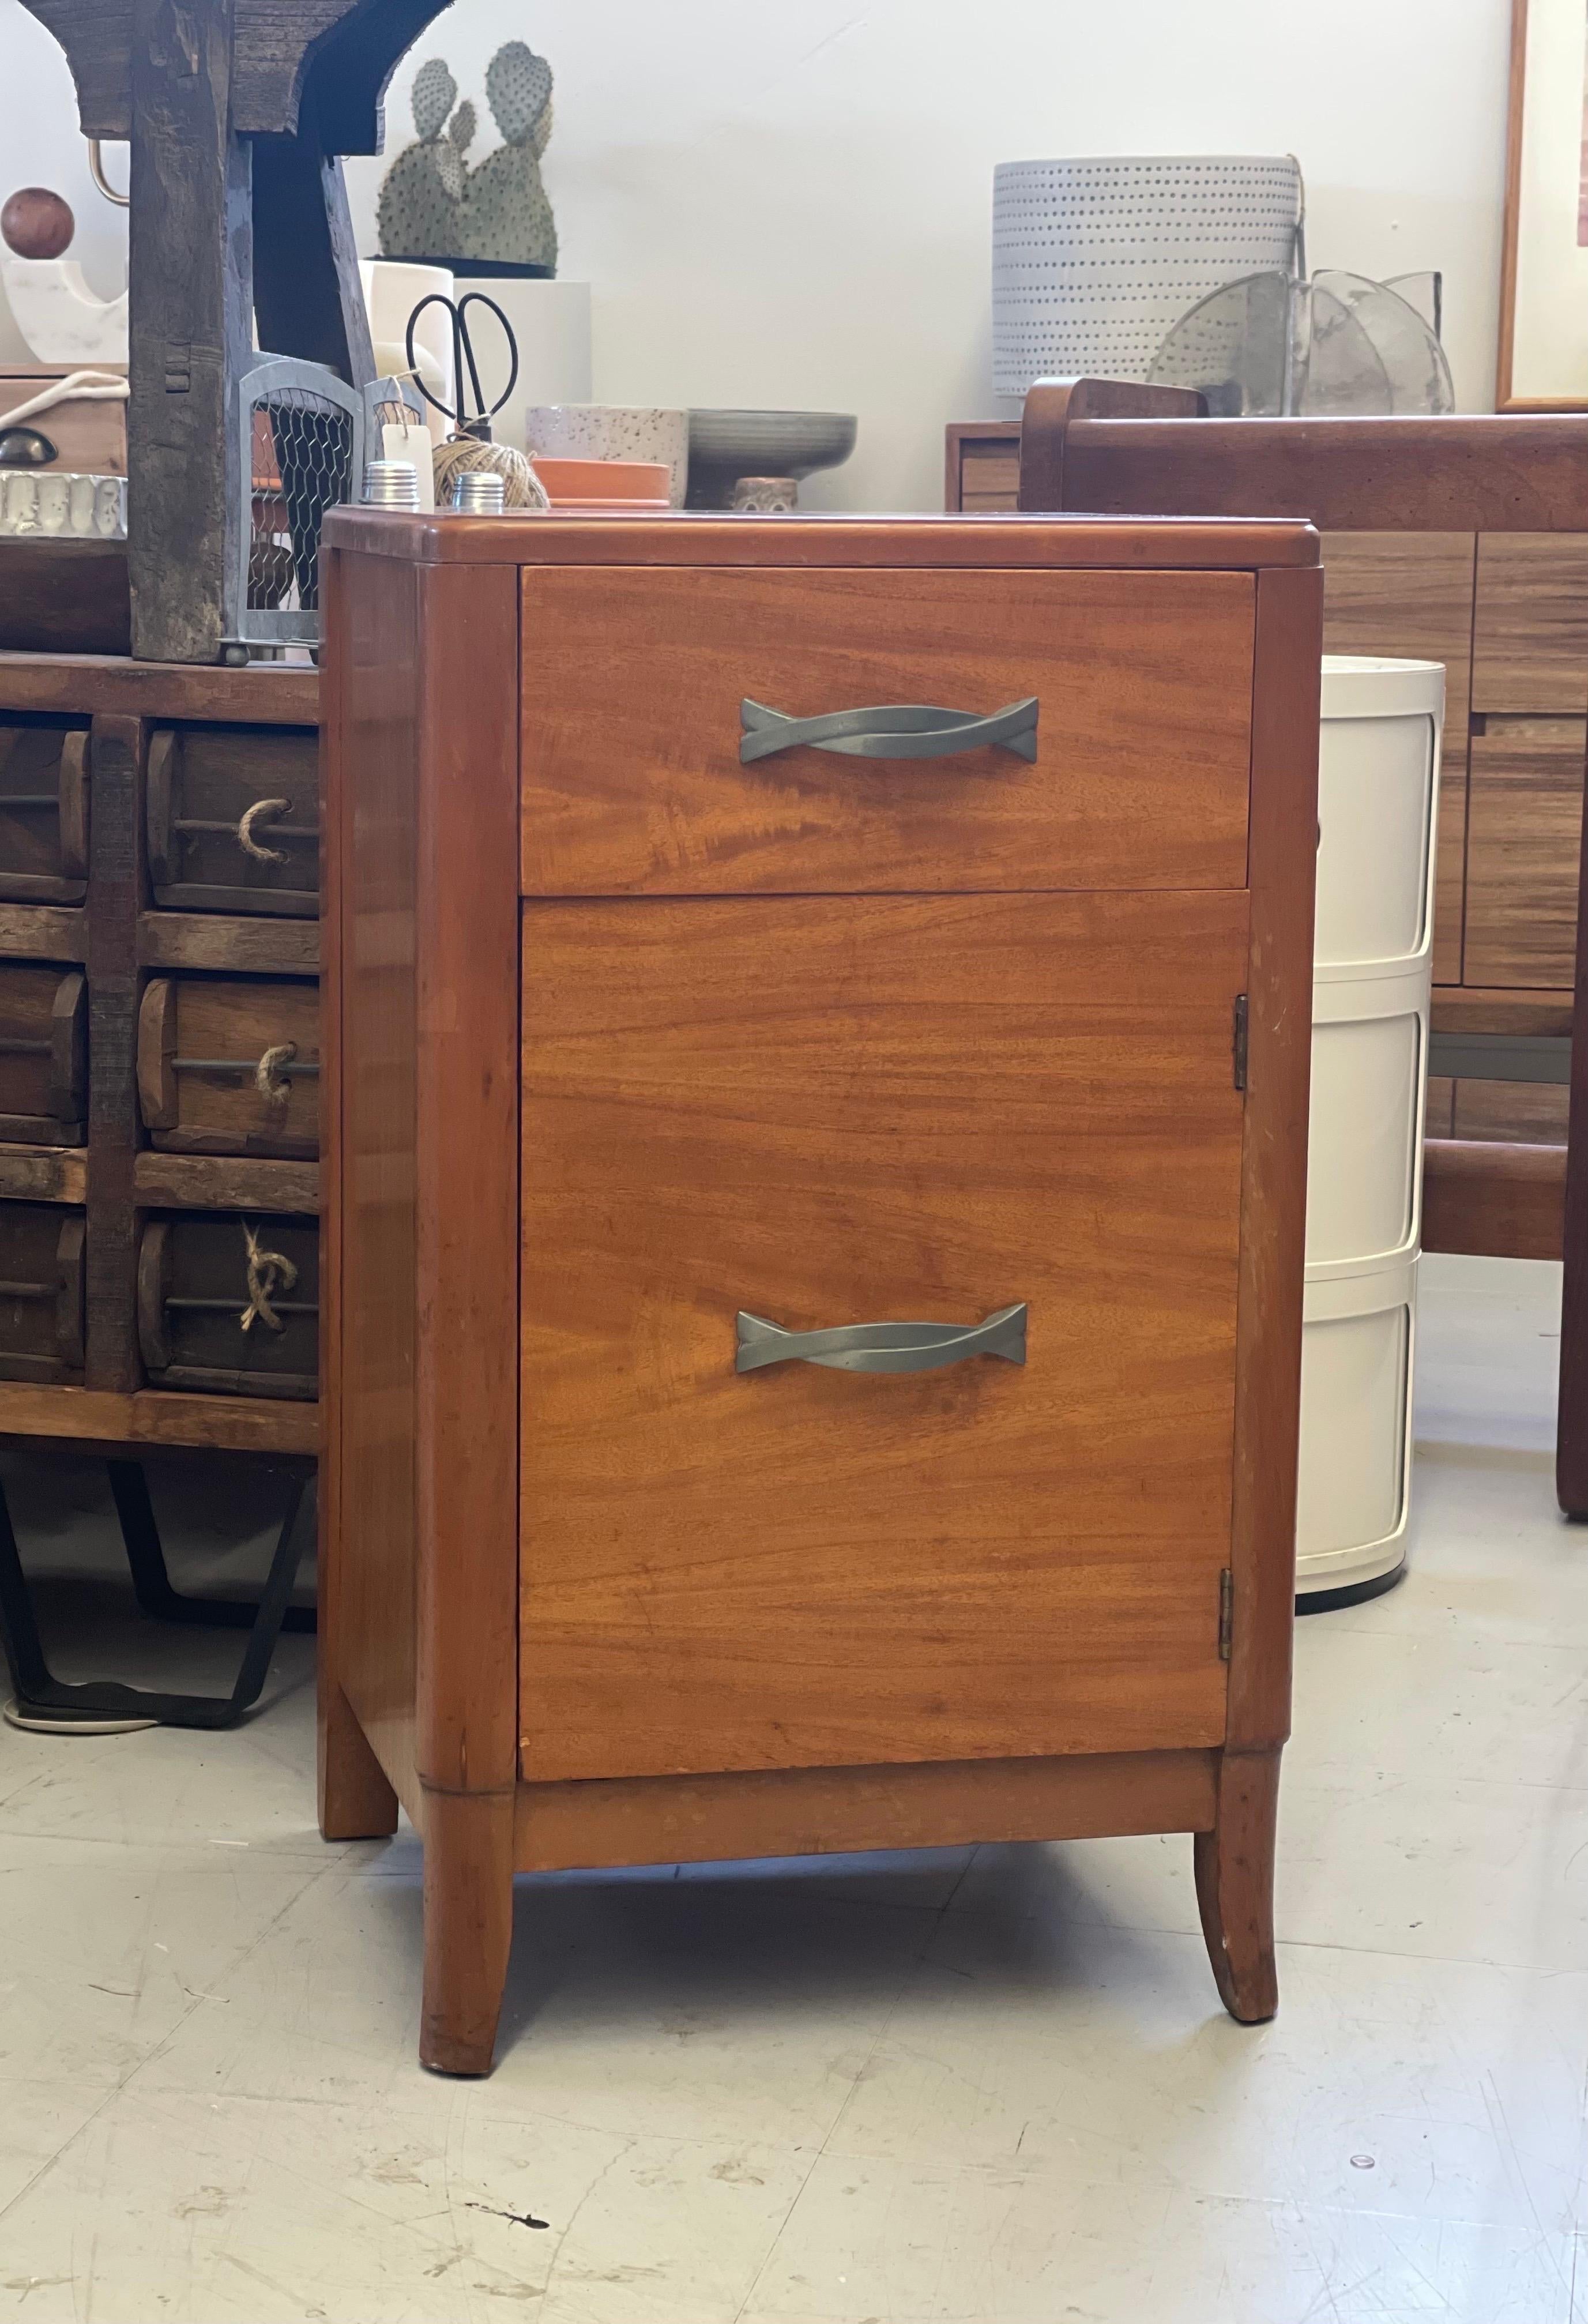 Vintage Mid-Century Modern Accent Table Dovetail Drawers Circa 1950s - 1970s. For Sale 1